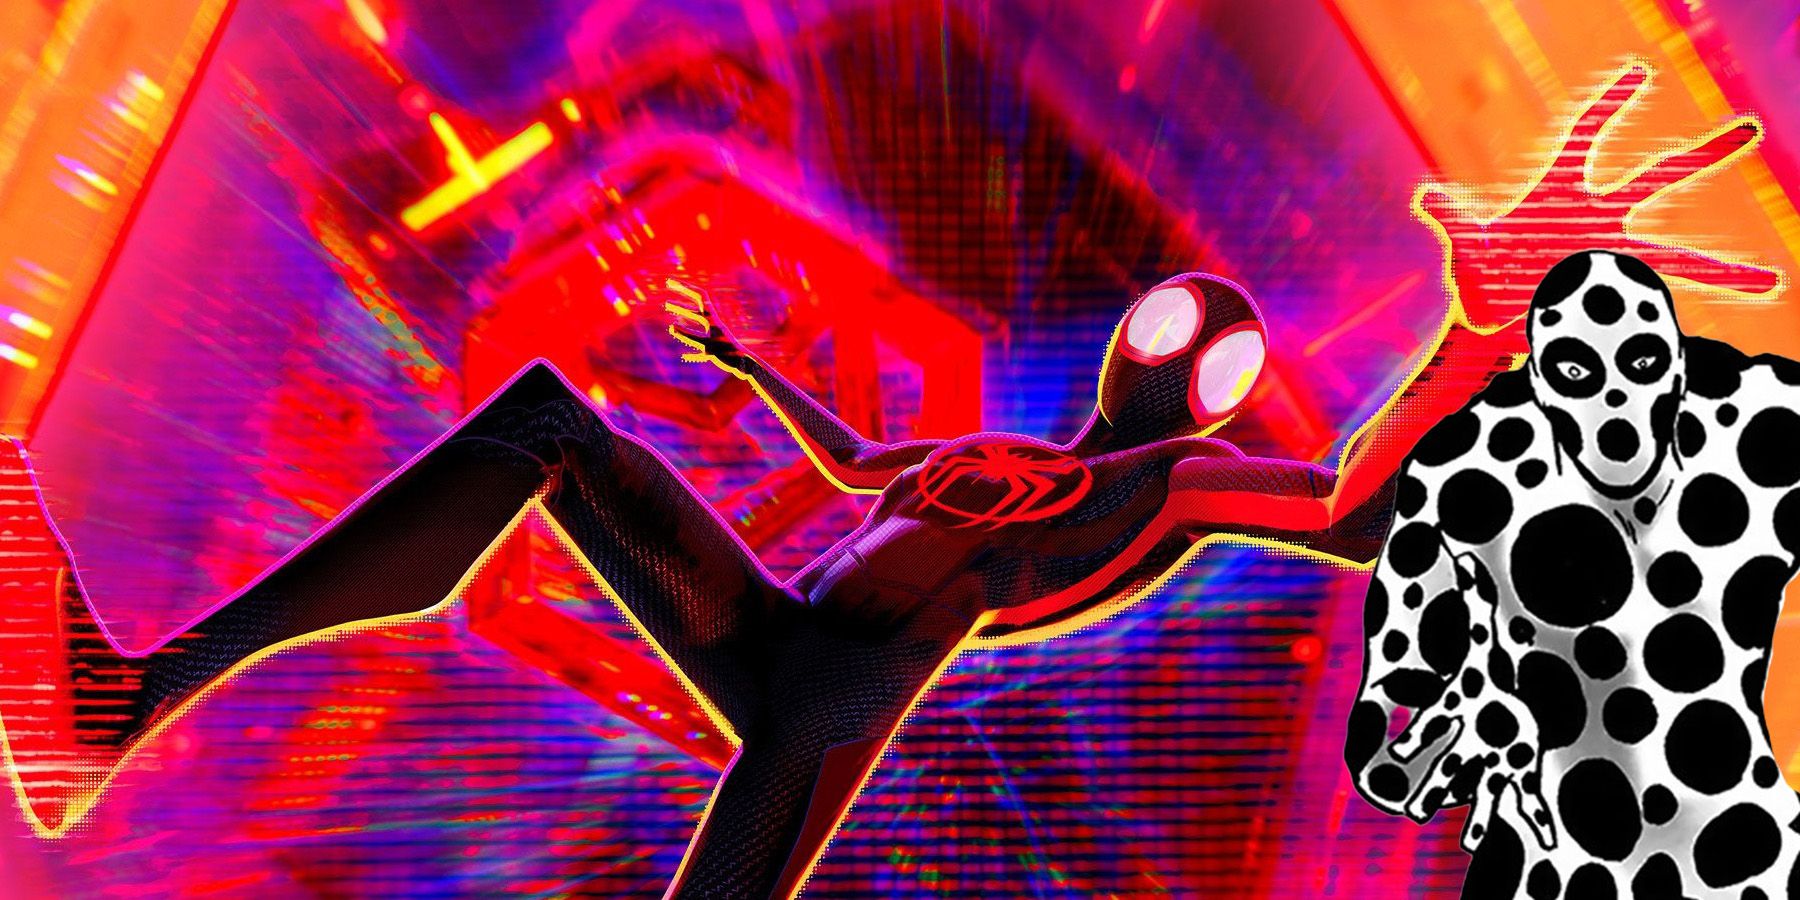 Who is The Spot in Spider-Man: Across The Spider-Verse?